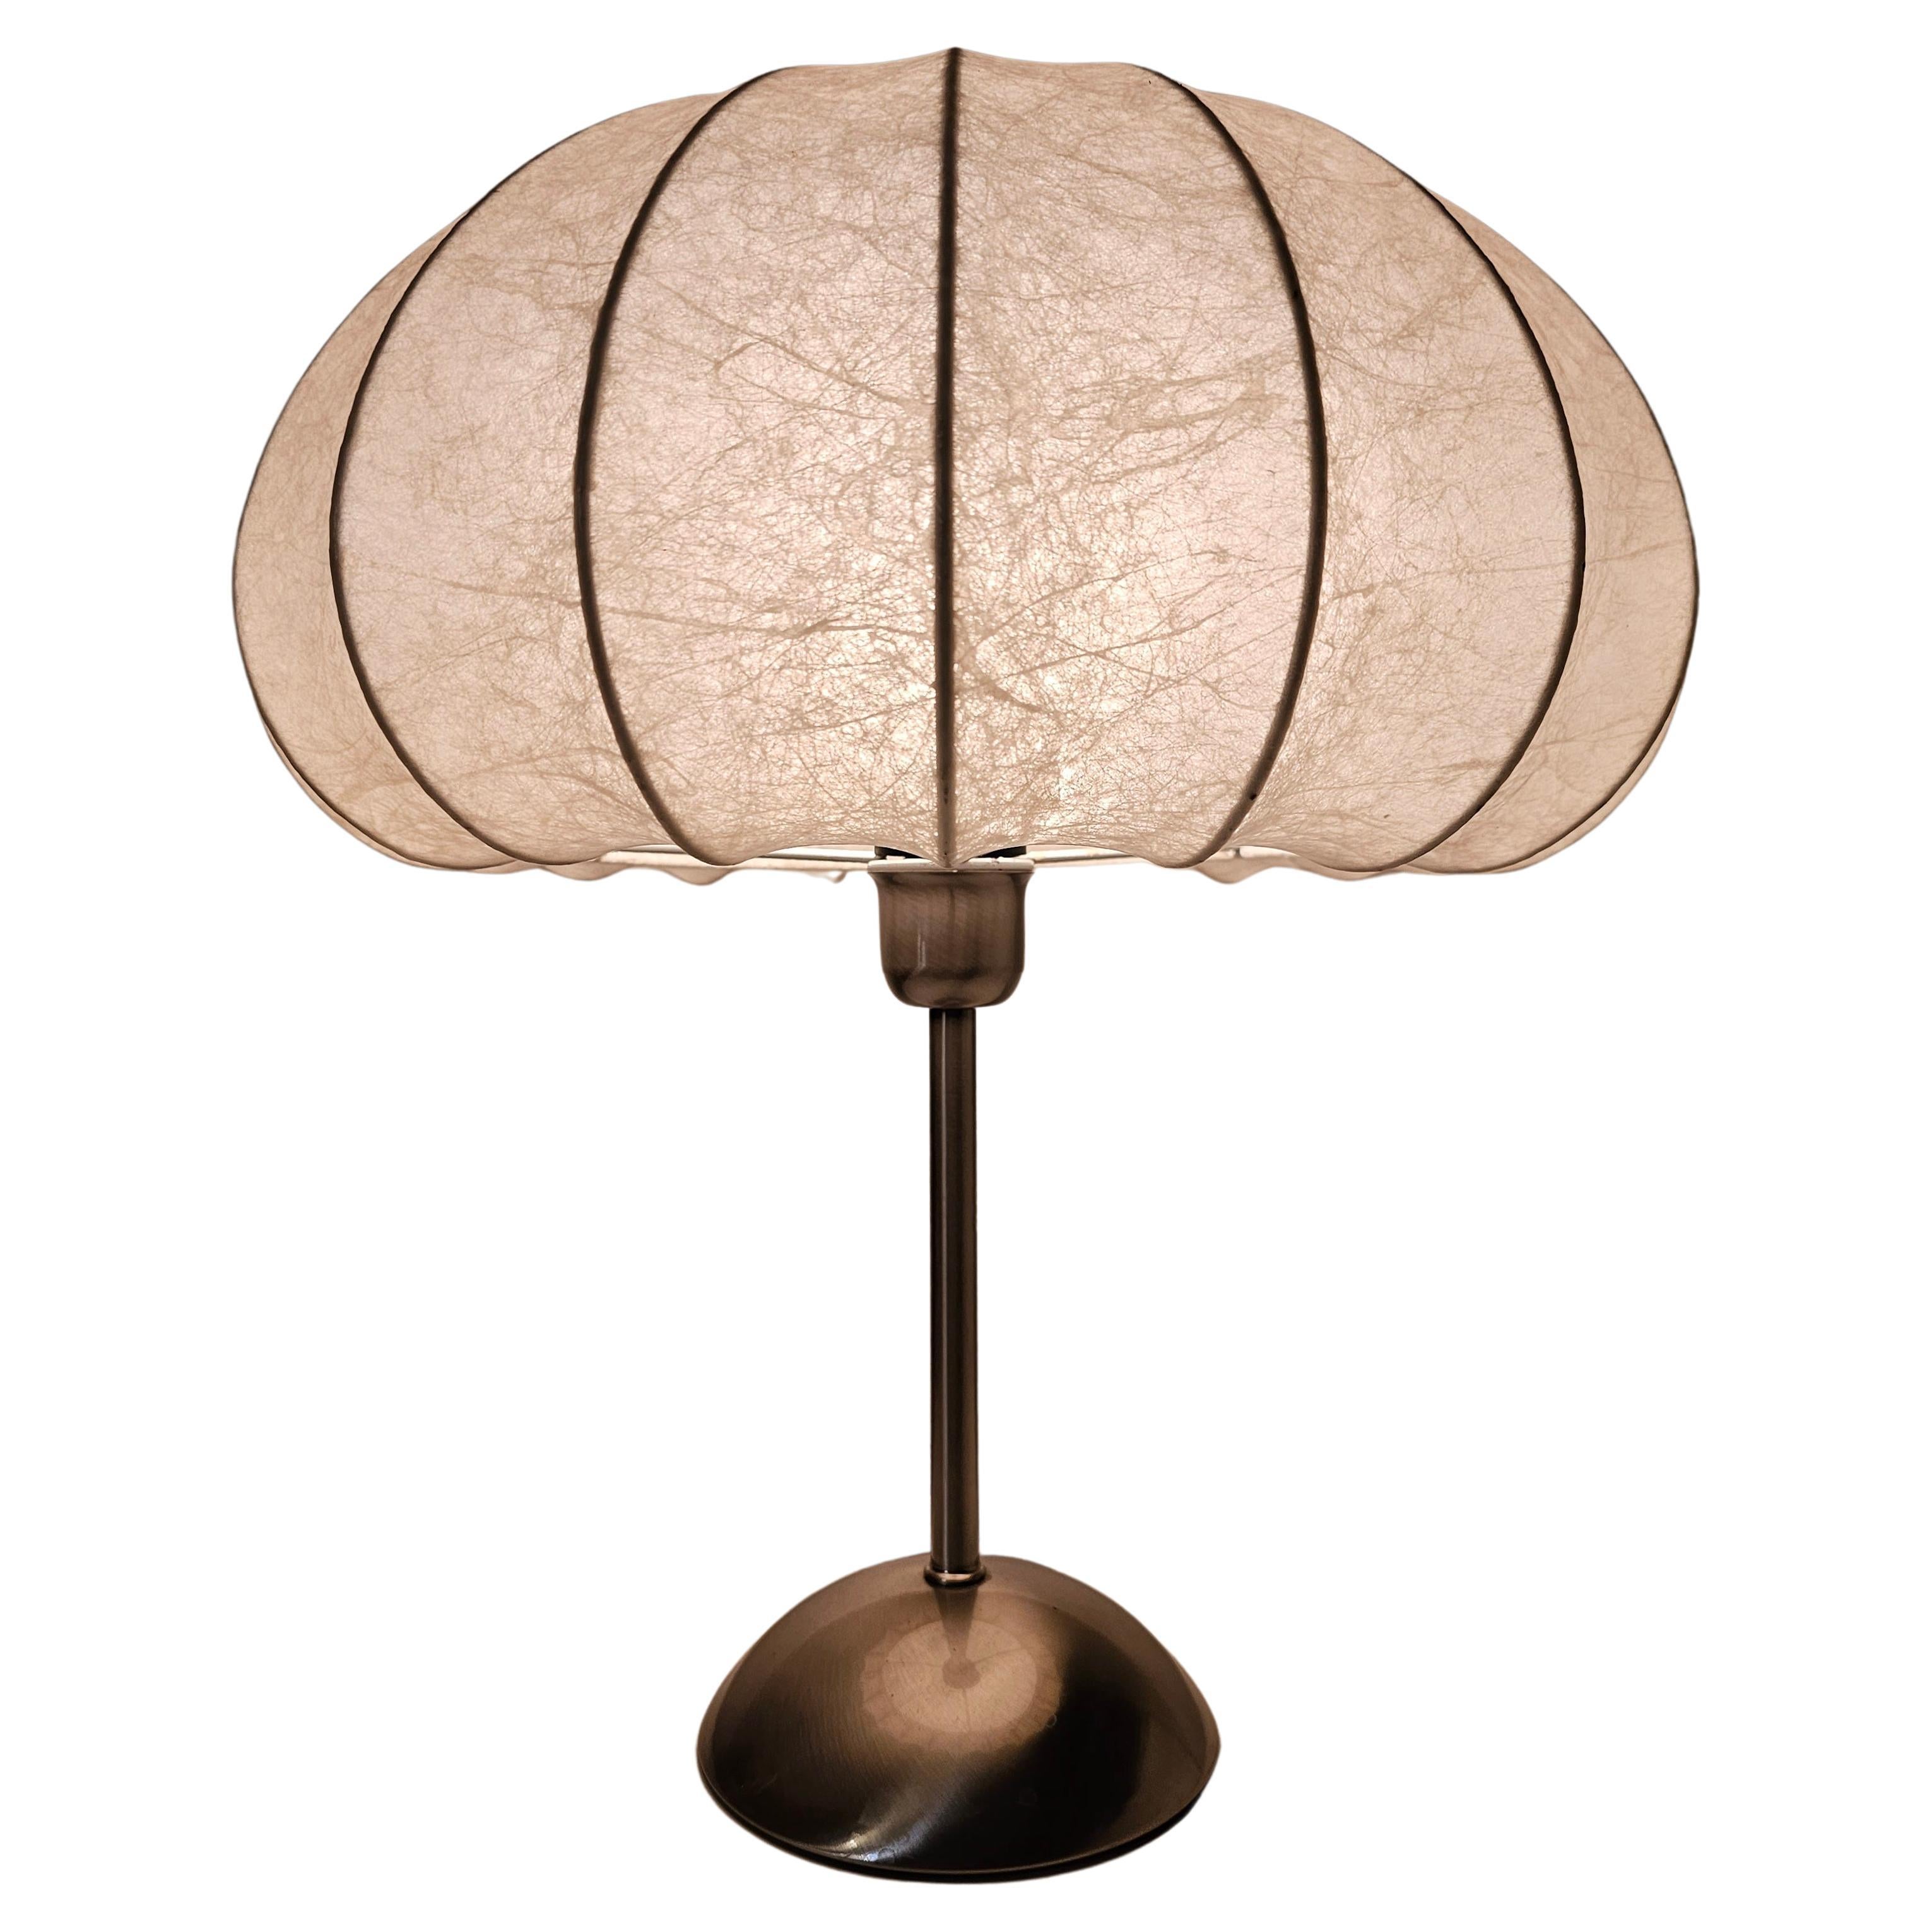 Mid Century Modern Cocoon Table Lamp in style of Achille Castiglioni, Italy 1970